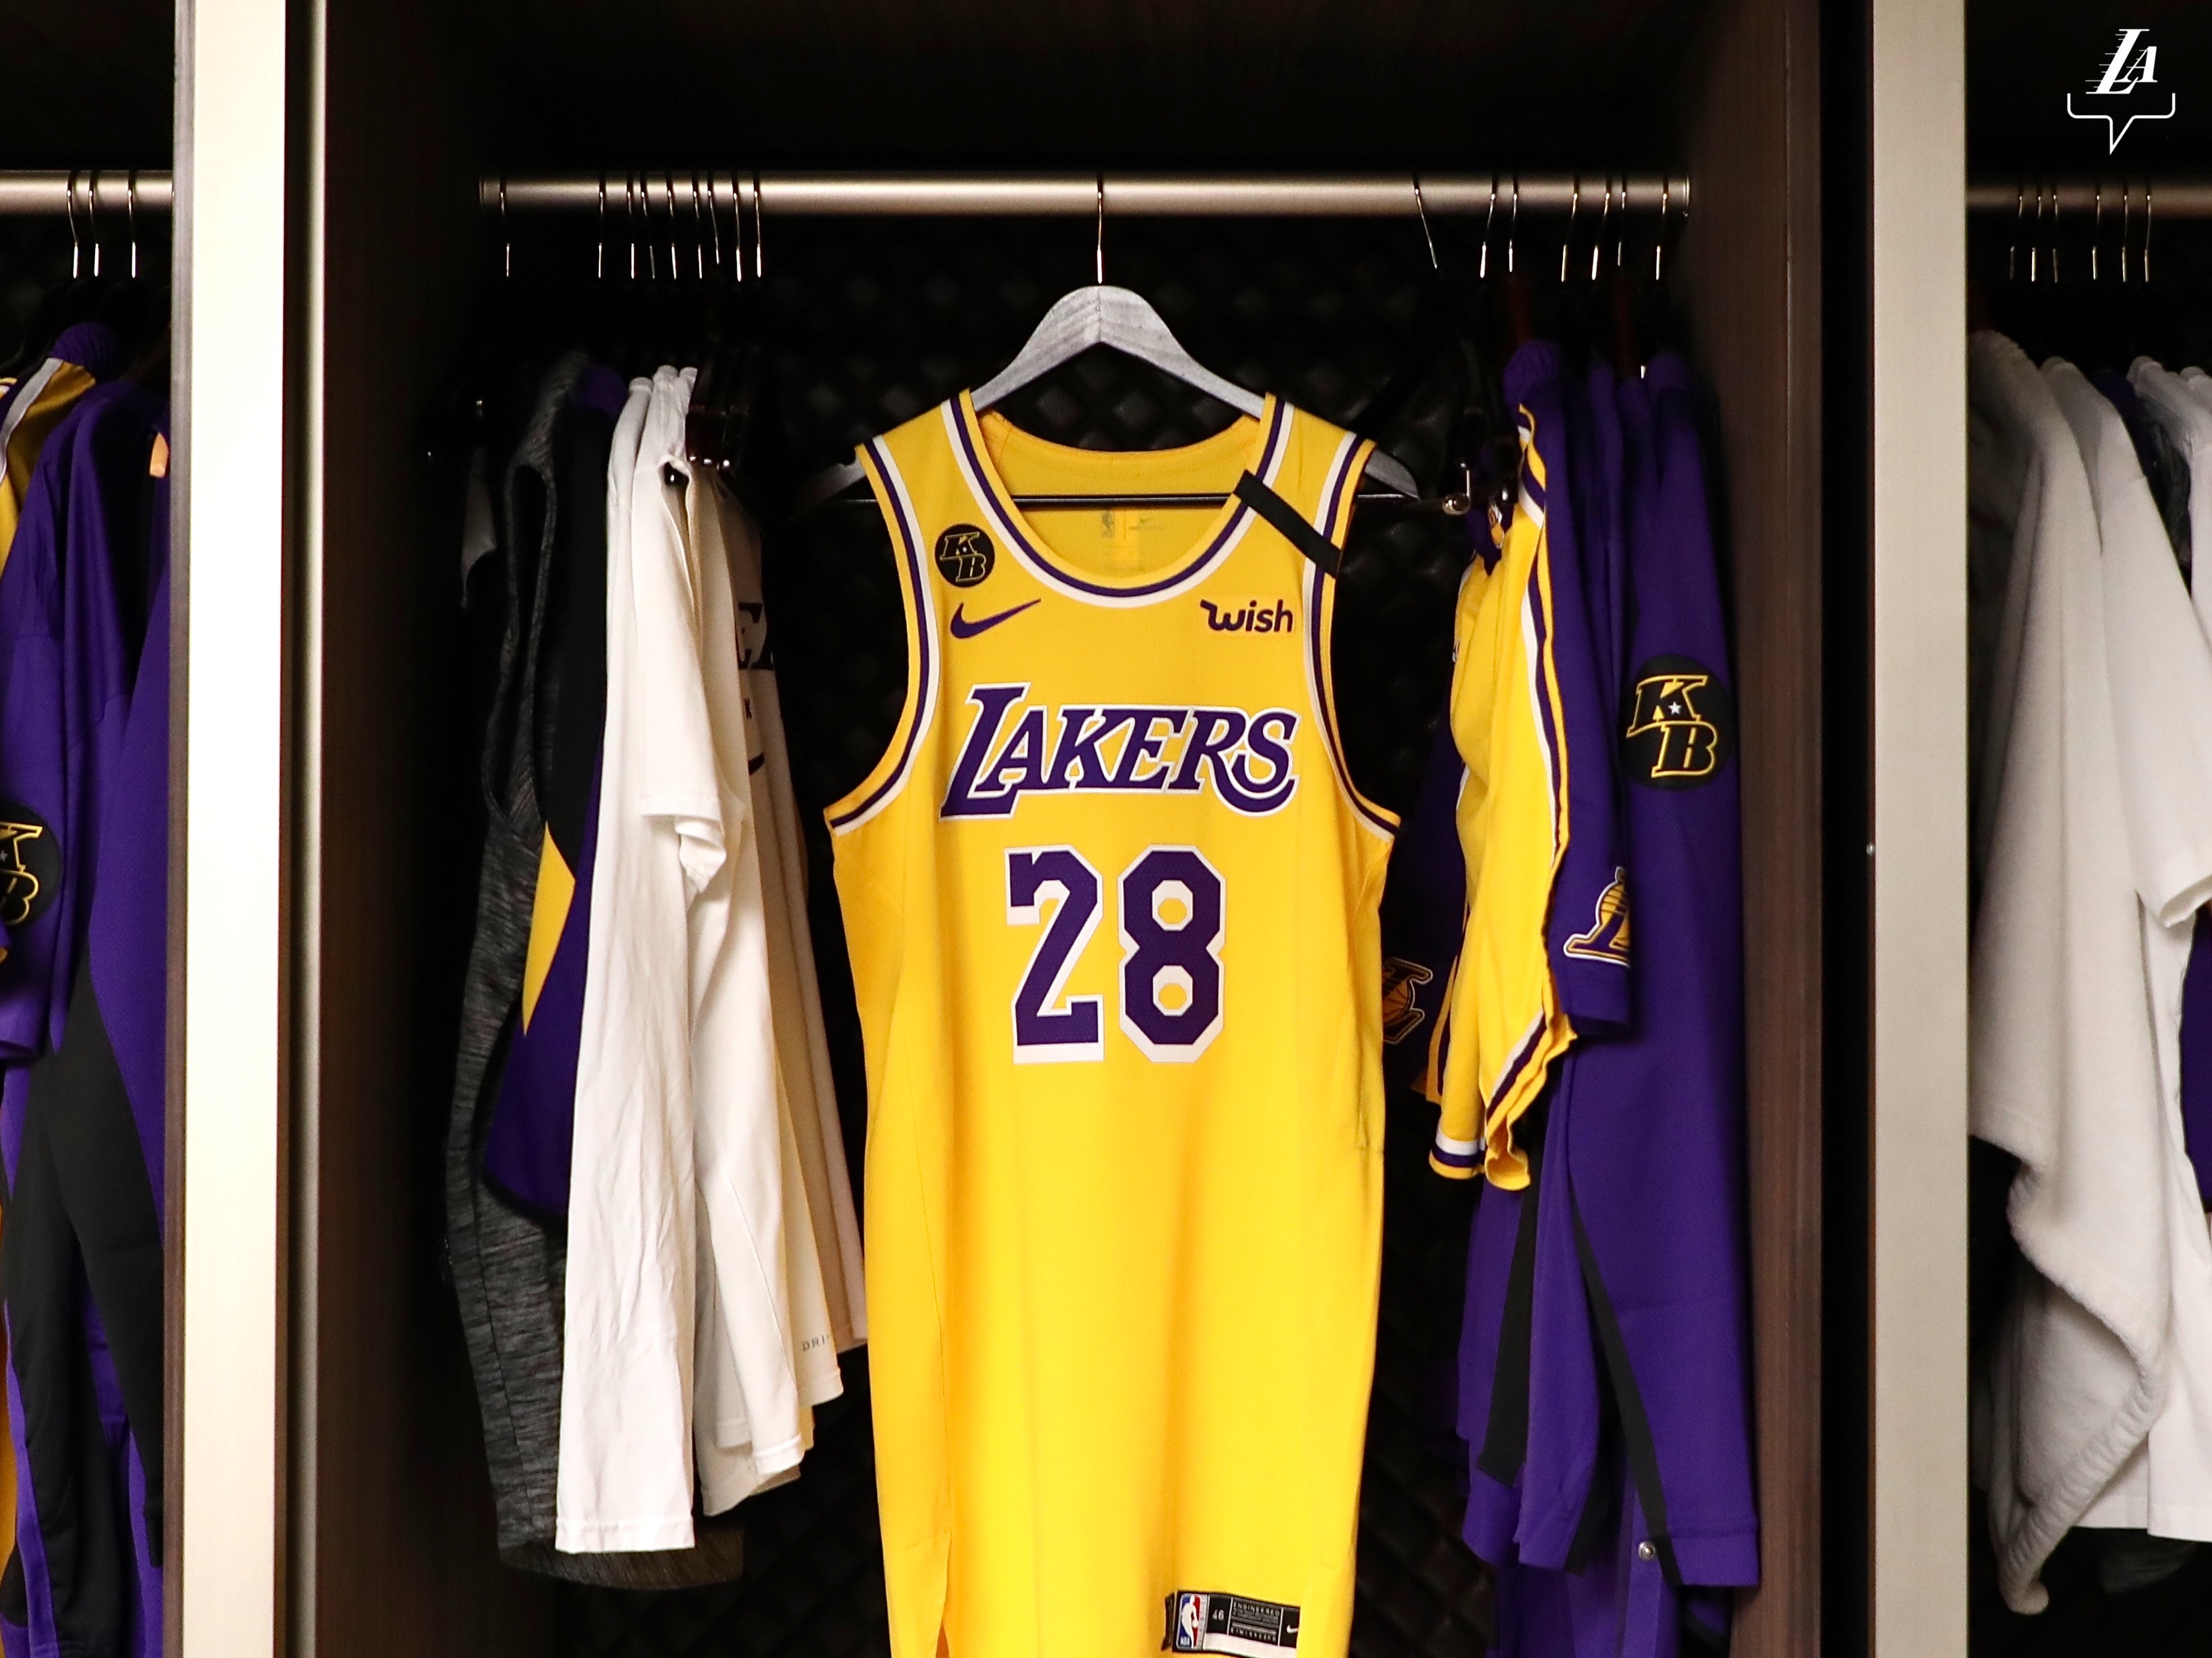 Lakers Store - Game day fit☑️ Get your gear on at the Lakers